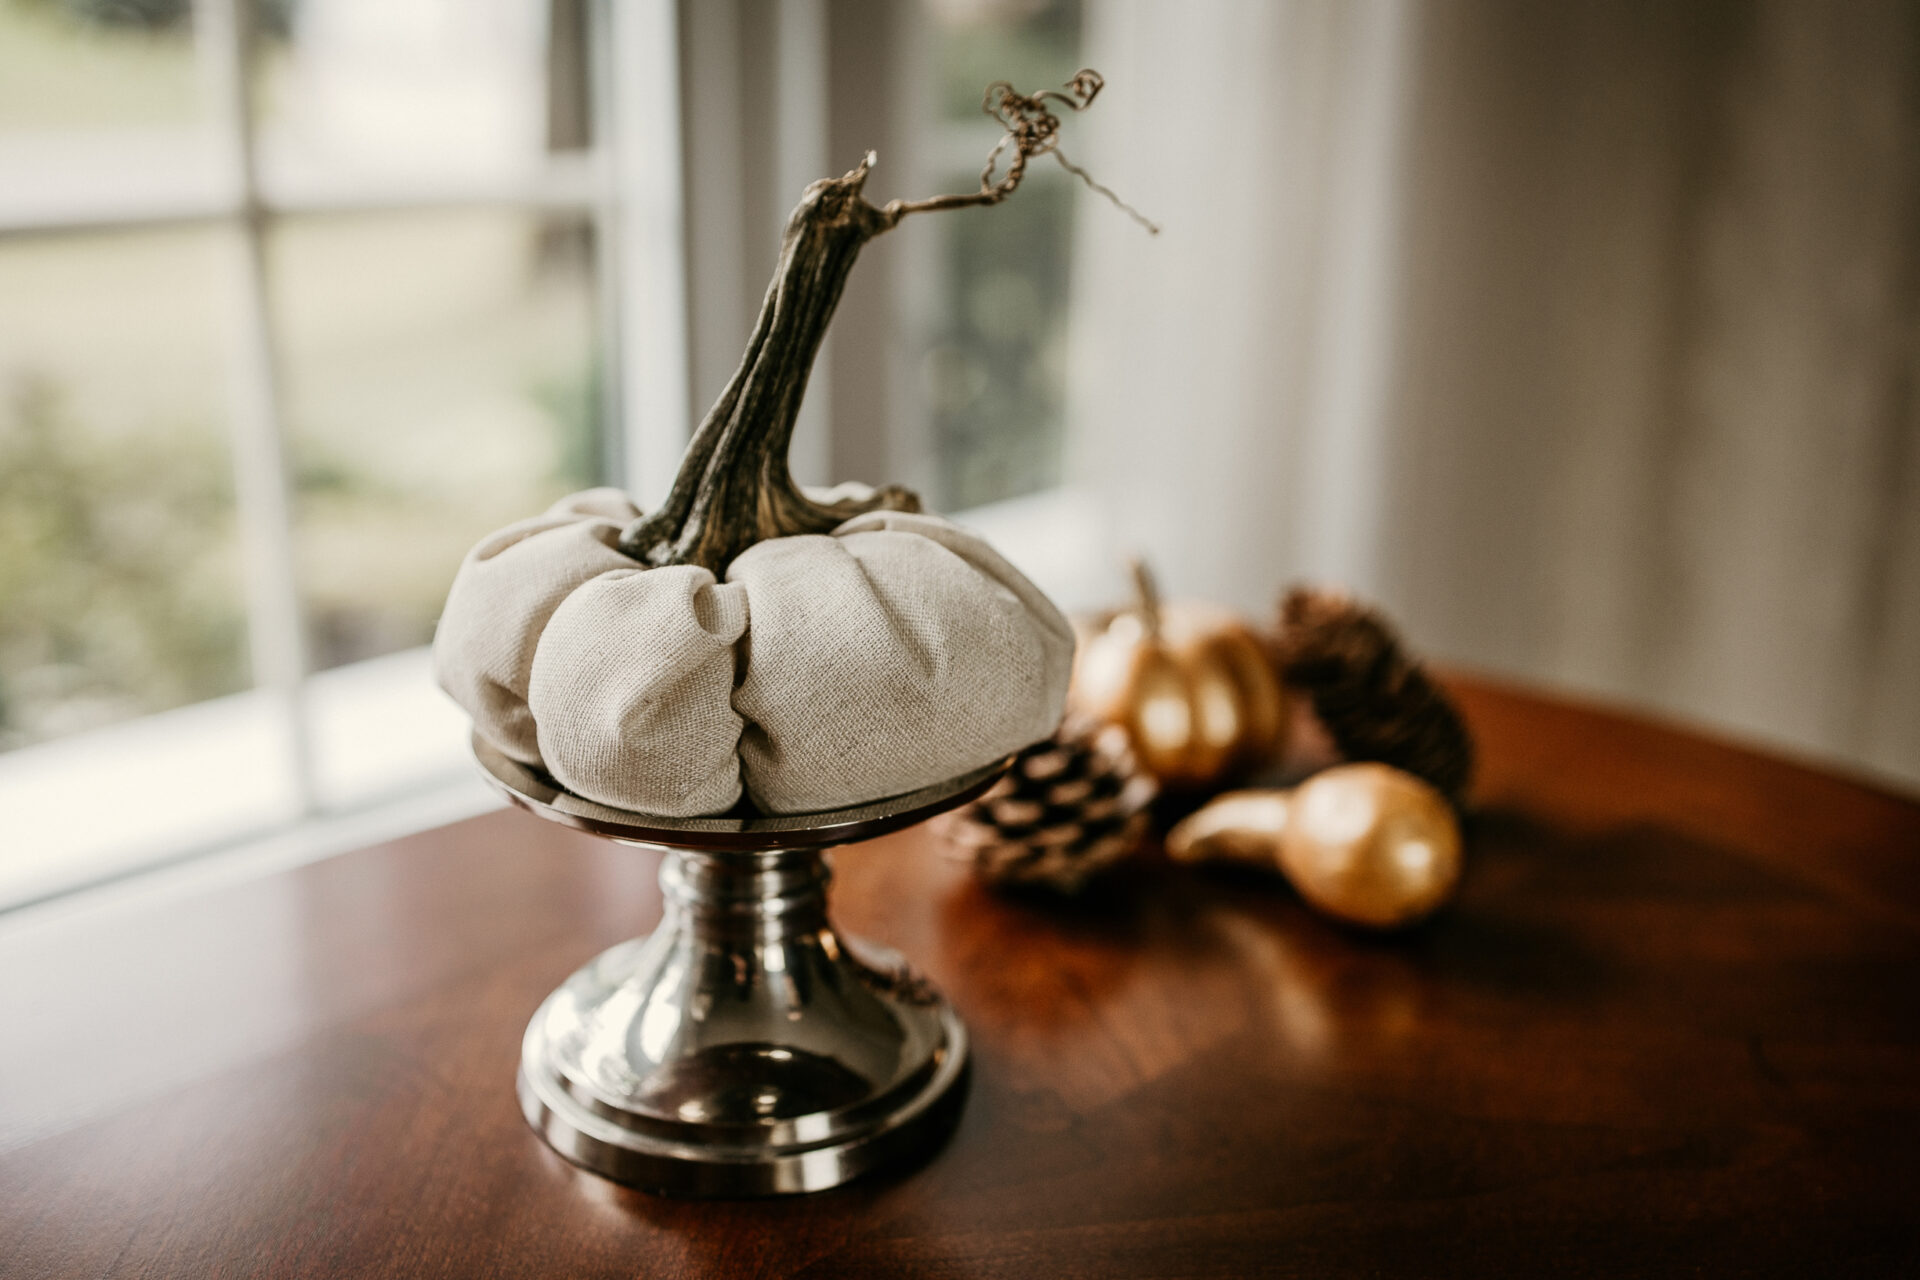 A linen pumpkin with a real stem is propped on a silver stand and photographed in front of a window.